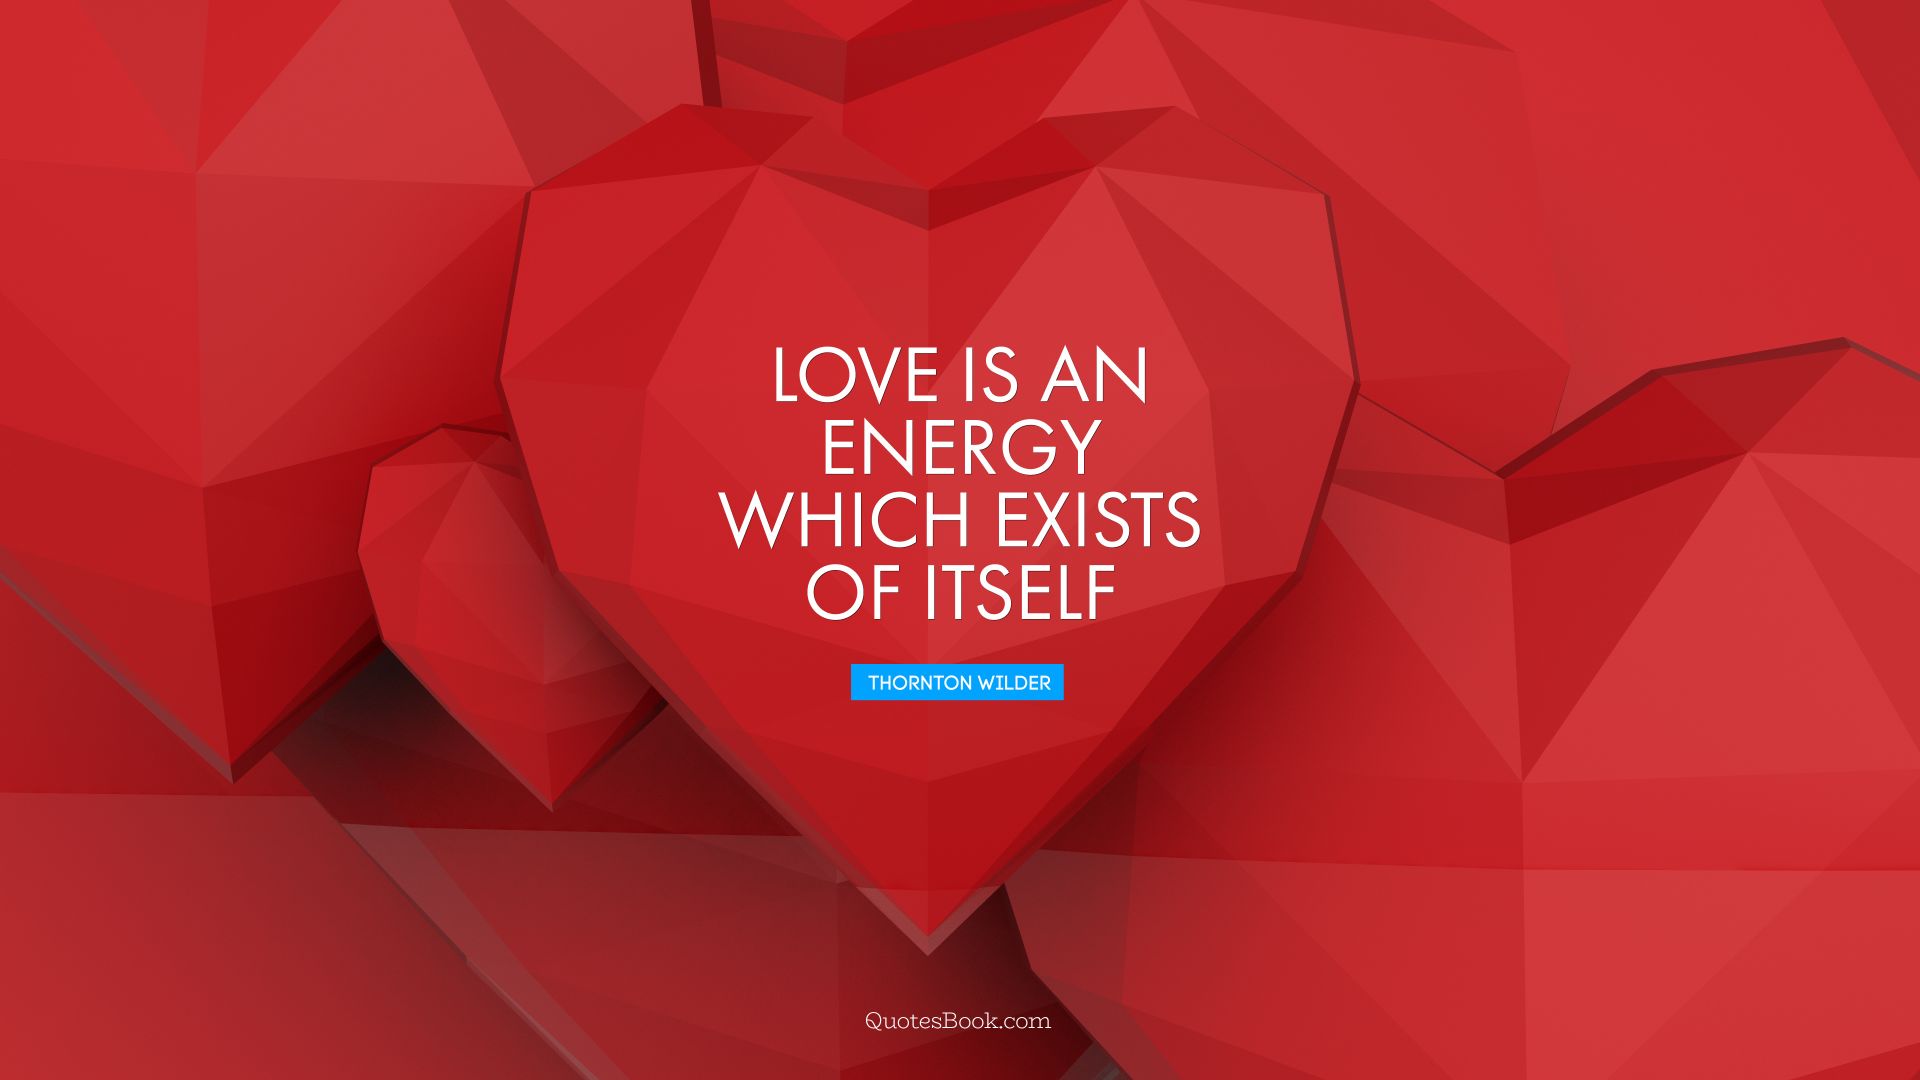 Love is an energy which exists of itself. - Quote by Thornton Wilder